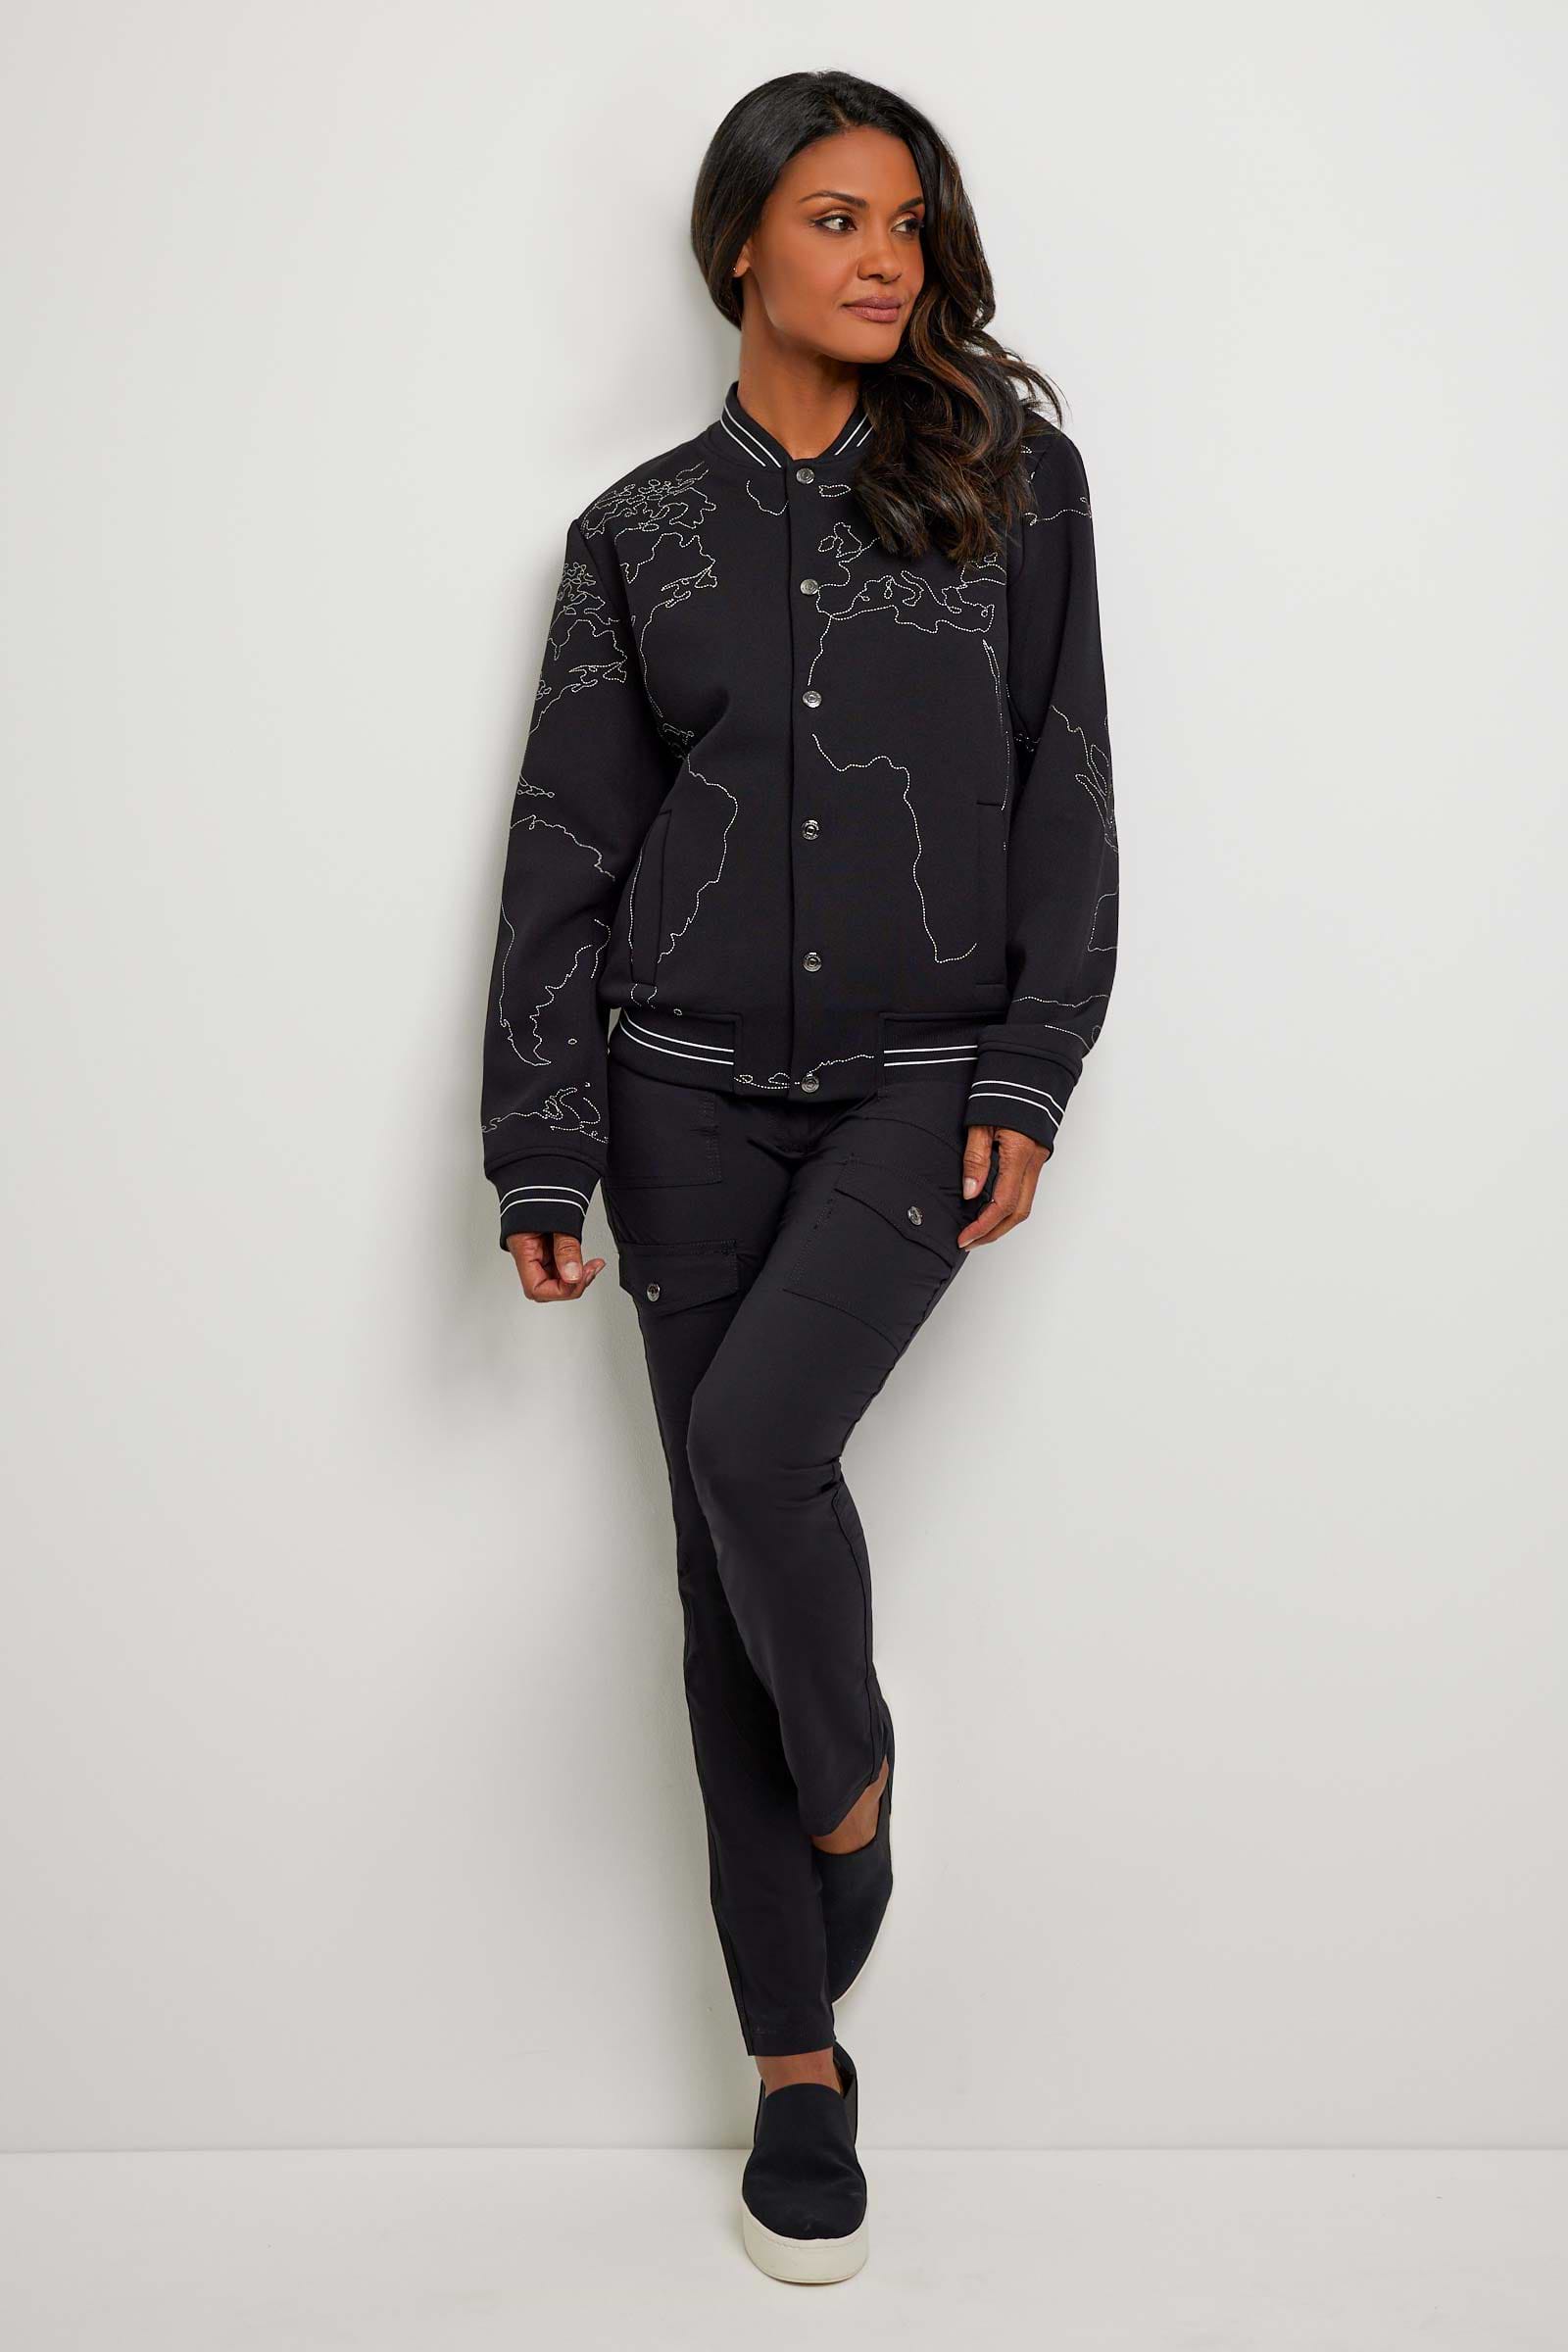 The Best Travel Jacket. Woman Showing the Front Profile of a Map Bomber Jacket in Black.